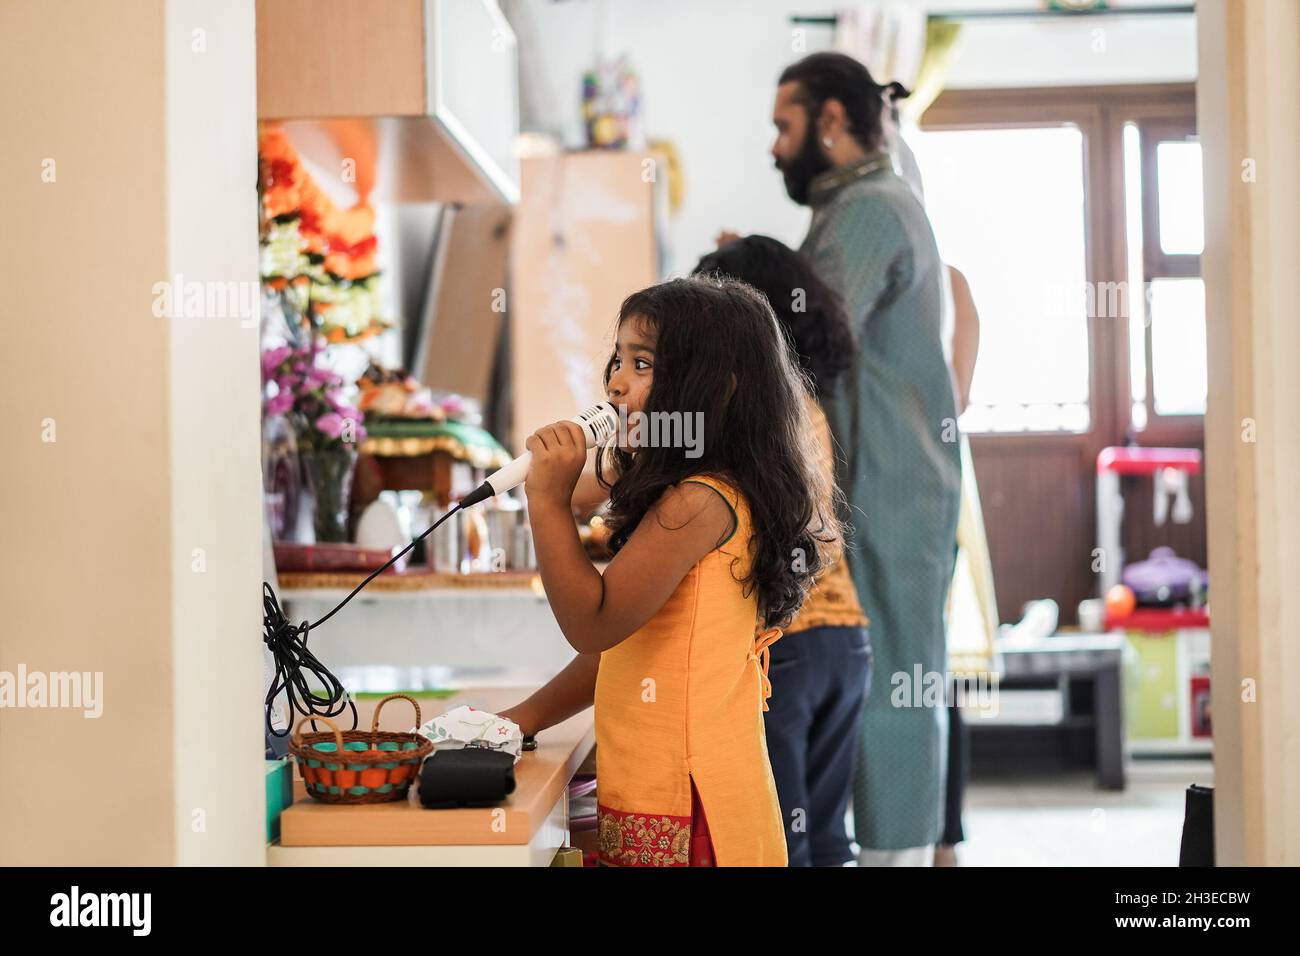 Indian family celebrating Diwali or hindu festival at home - Focus on girl playing with microphone Stock Photo